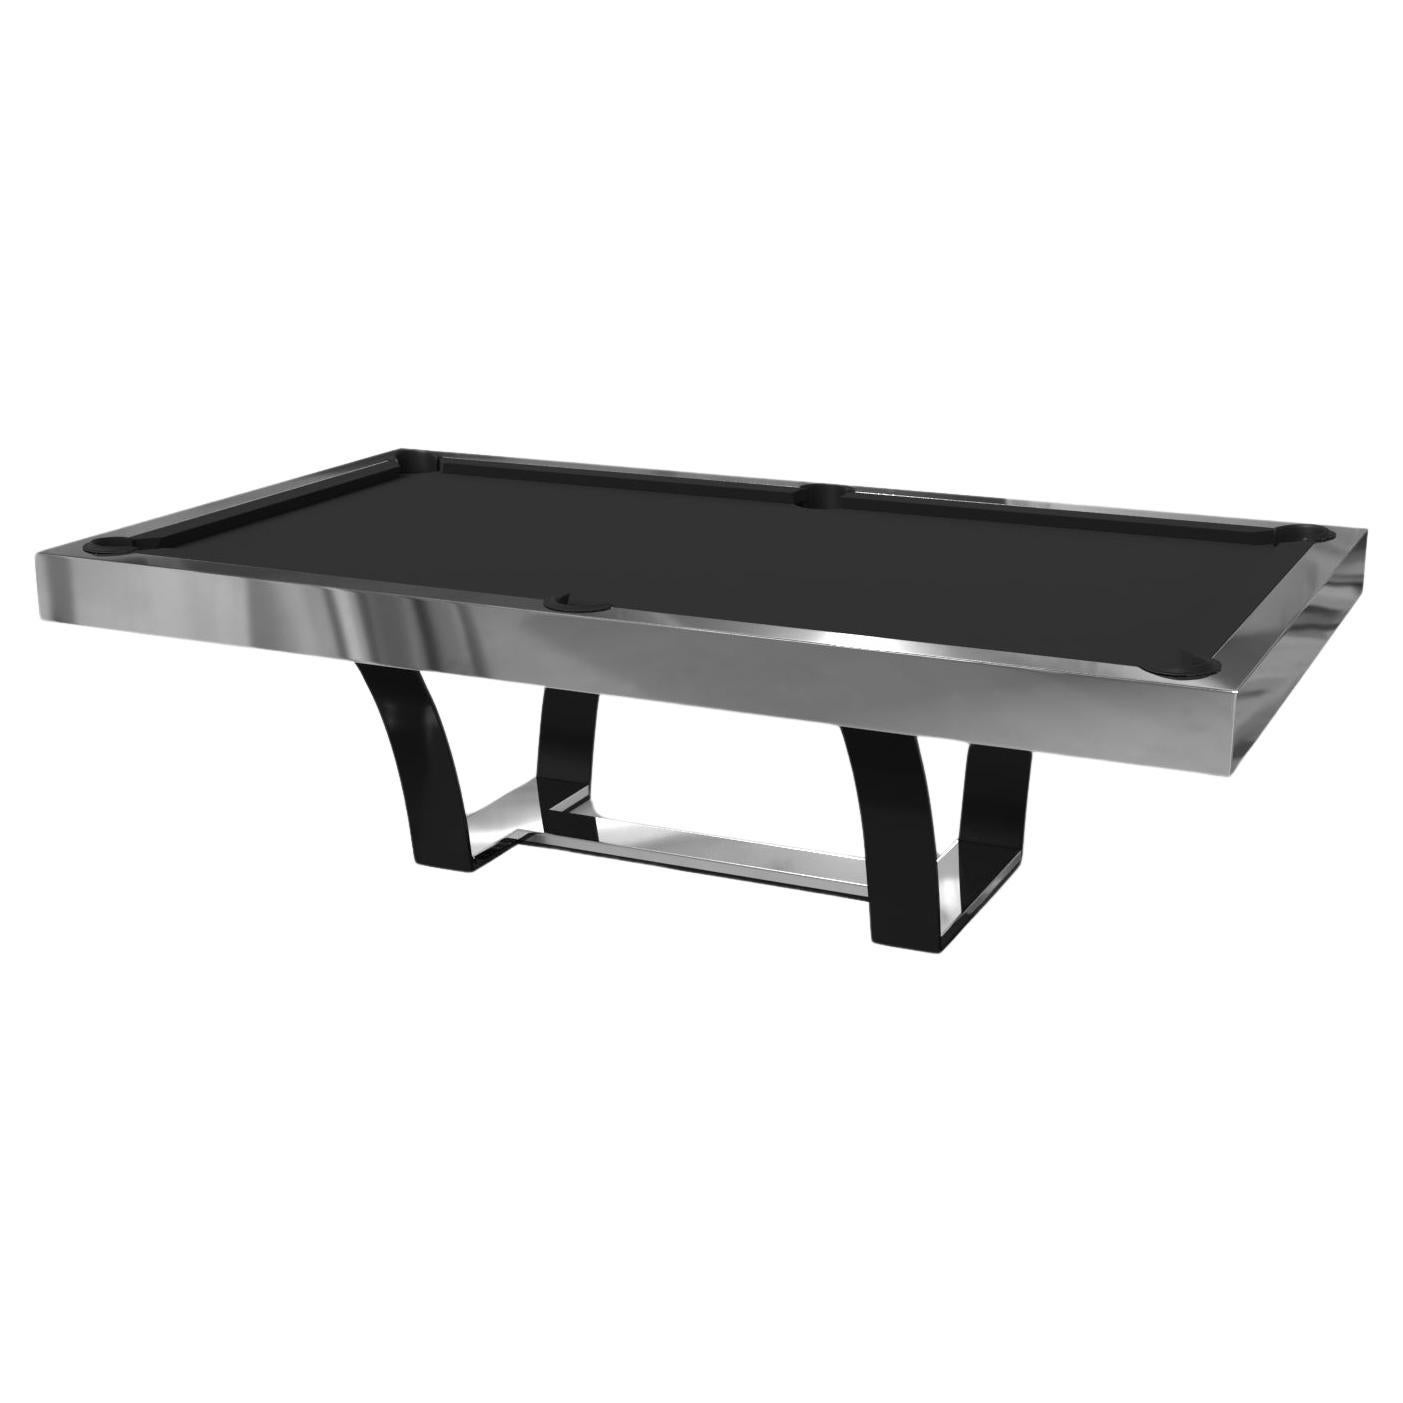 Elevate Customs Elite Pool Table / Solid Stainless Steel in 9' - Made in USA For Sale